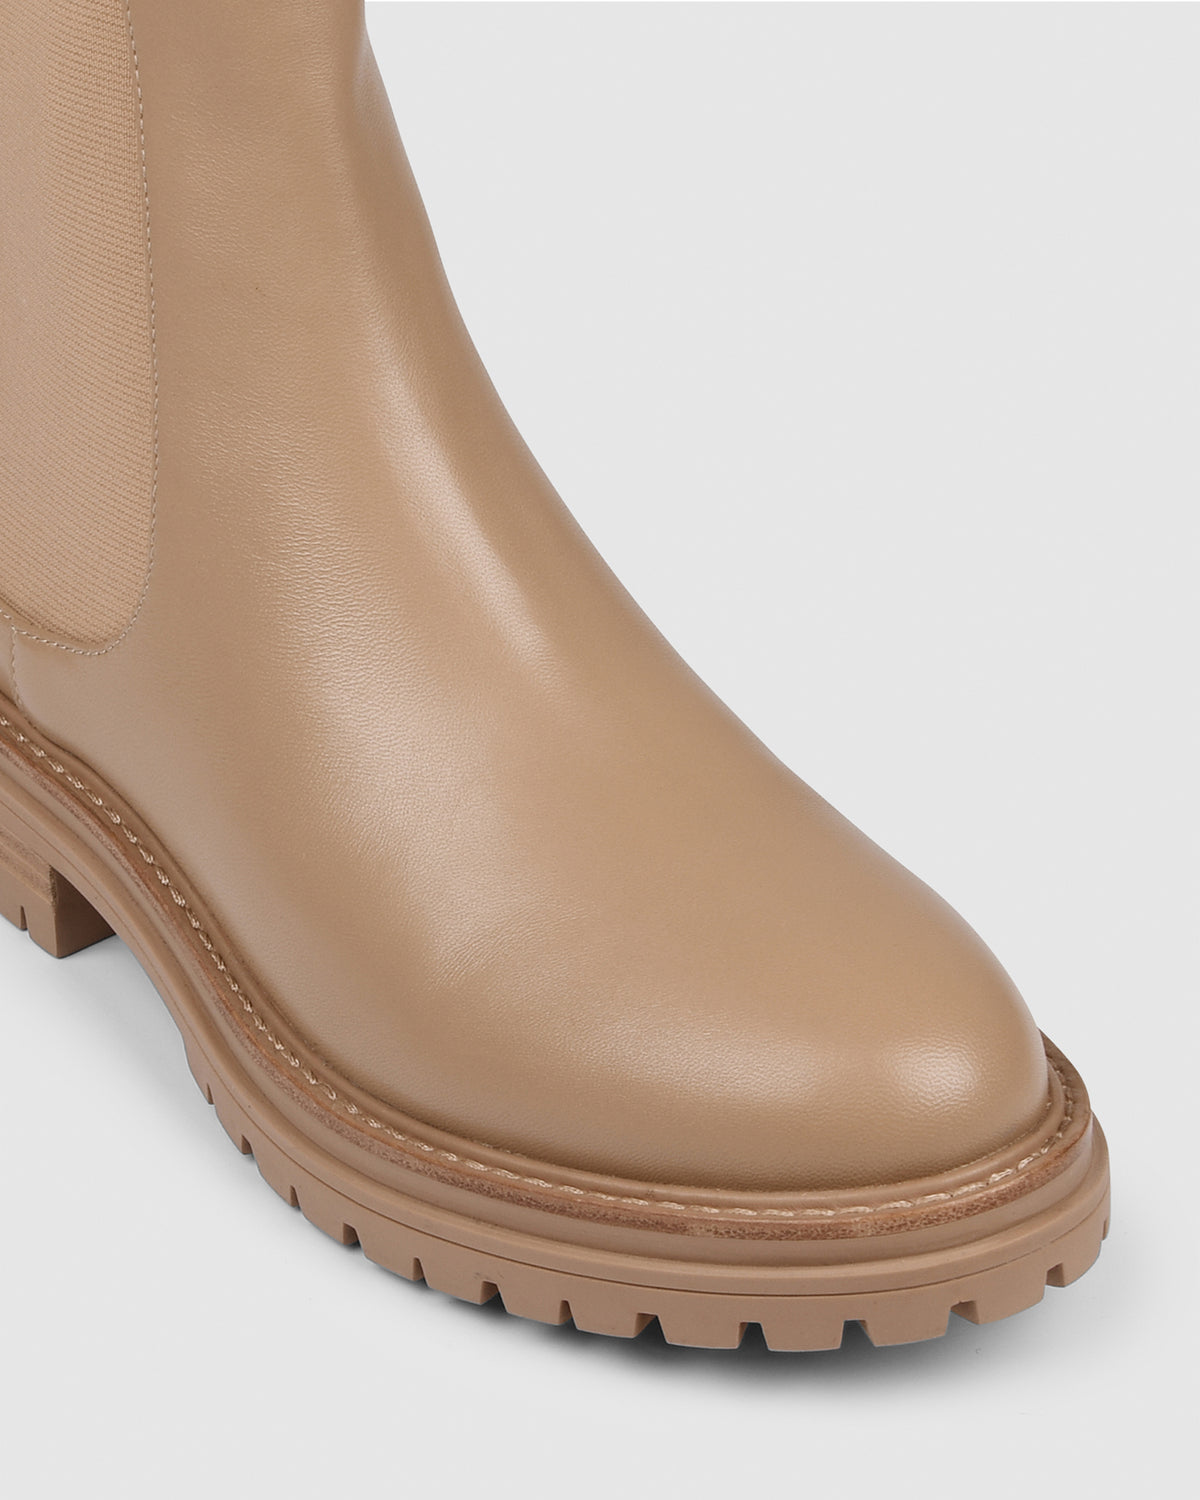 BLOOM FLAT ANKLE BOOTS BEIGE LEATHER